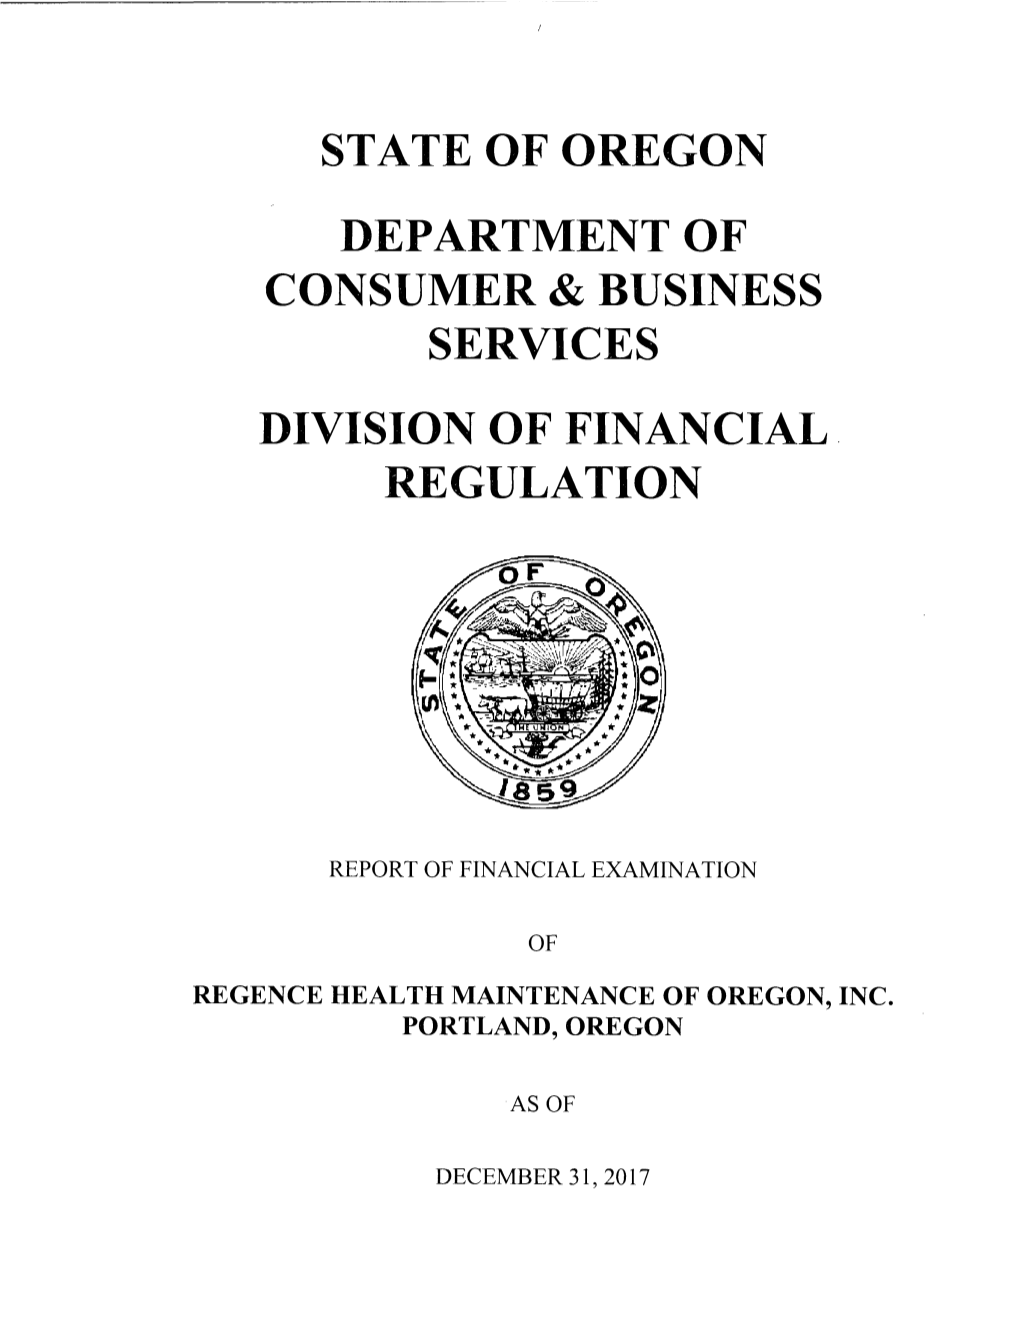 State of Oregon Department of Consumer & Business Services